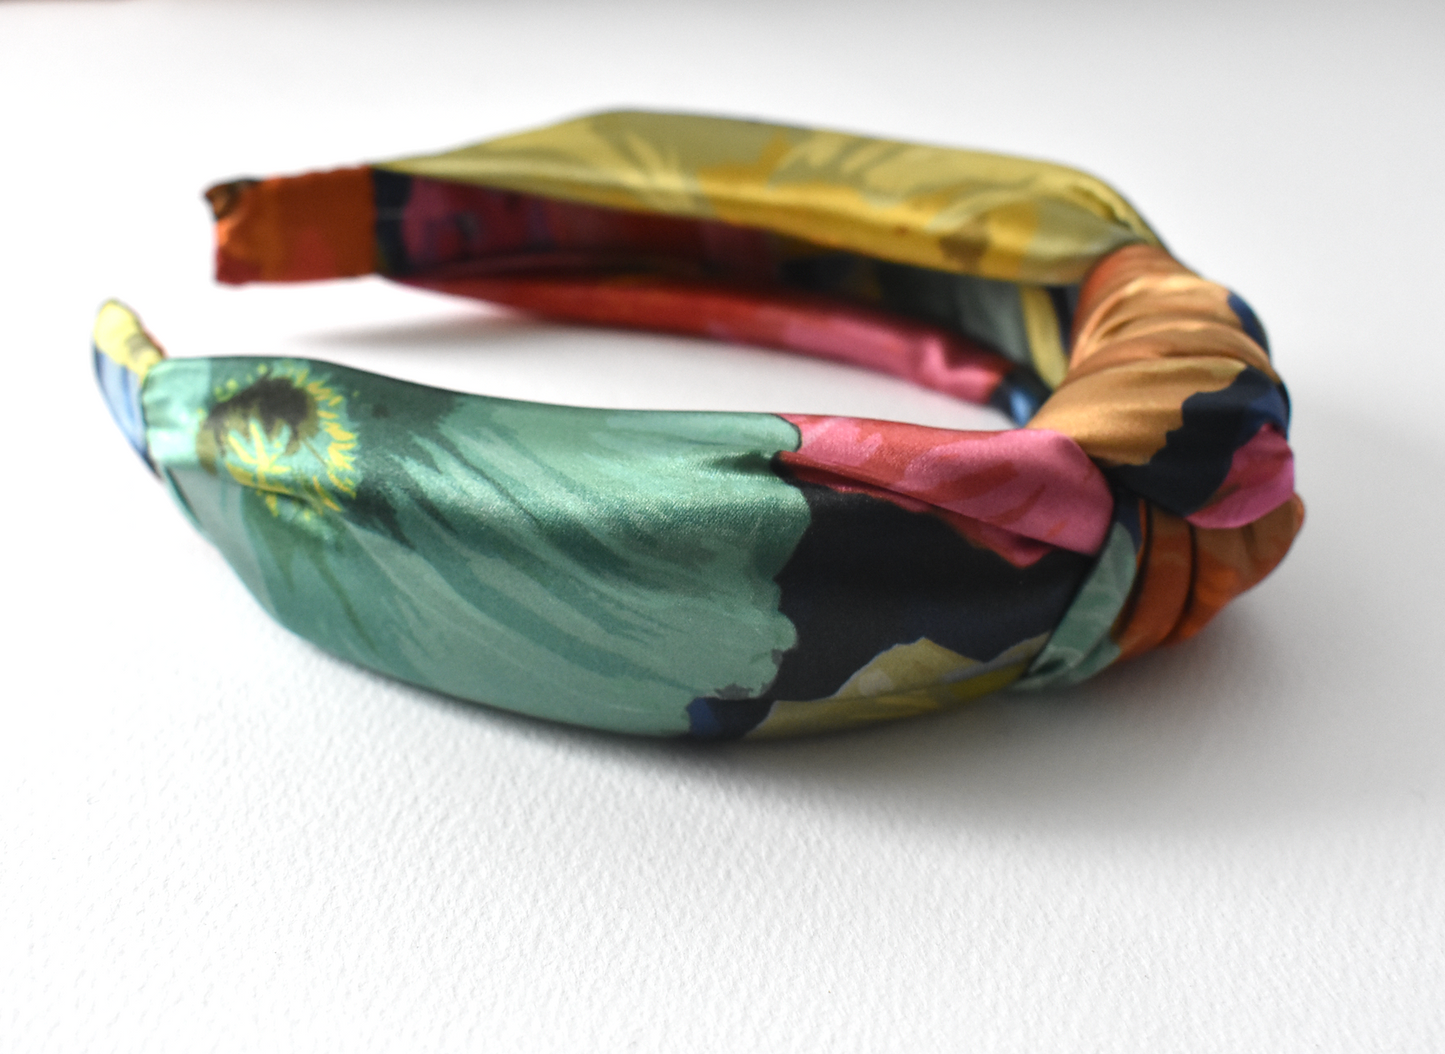 Luxury Silk Knot Alice band - Liberty of London Poppy Fantastic - Big Floral Graphic 100% Silk-Satin